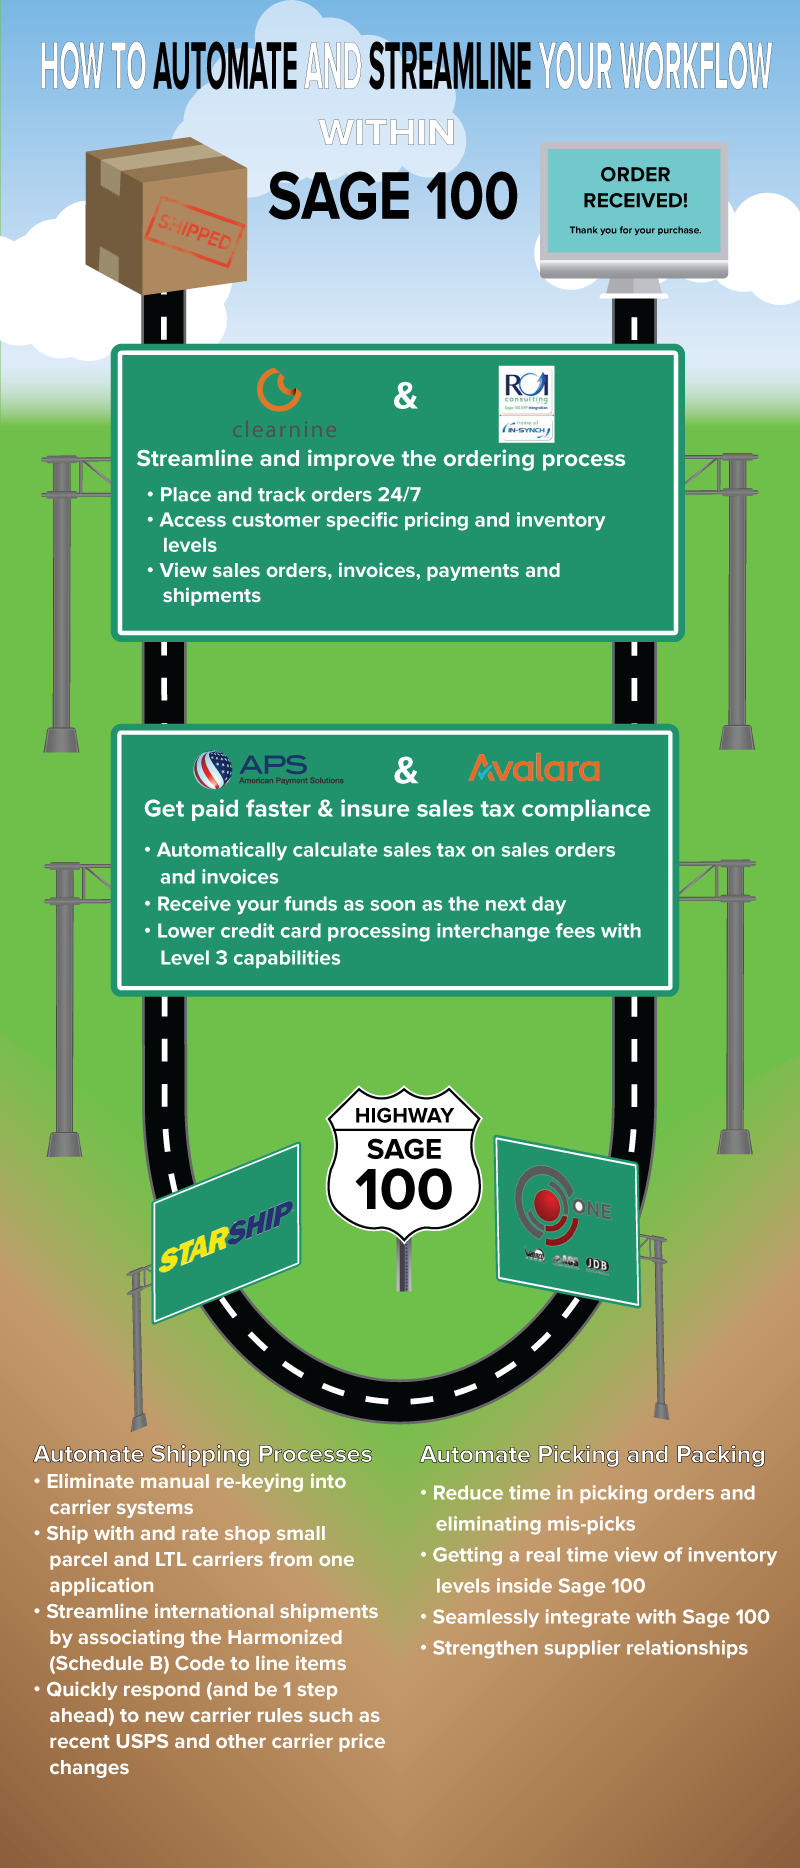 Sage 100 Infographic: How to Automate and Streamline eCommerce Sales Order Processing